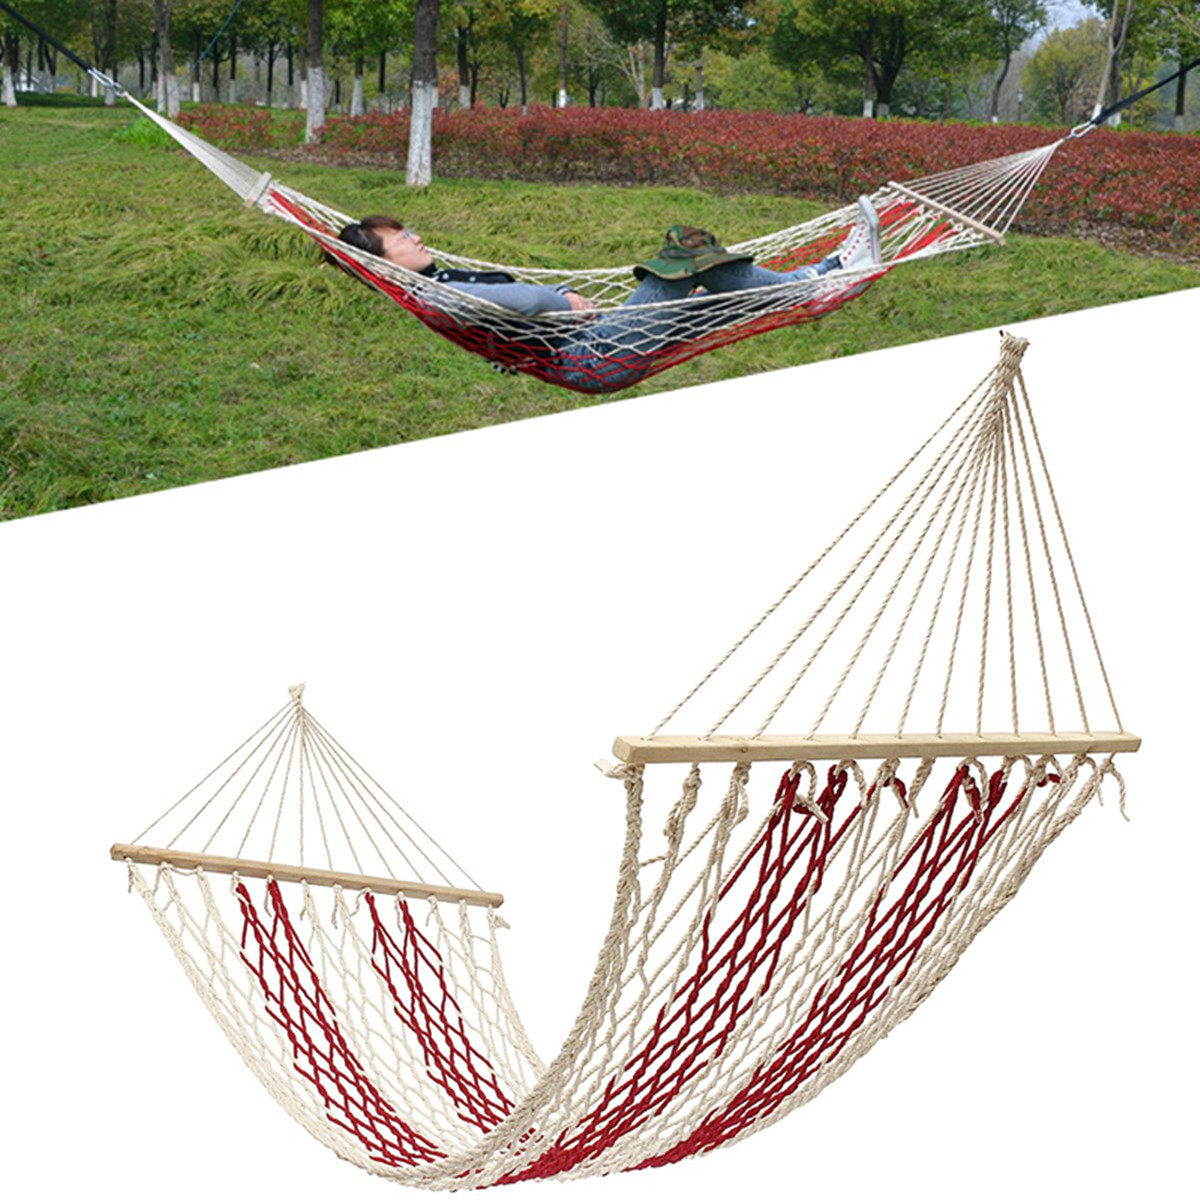 

190x80cm Outdoor Camping Hammock Cotton Rope Swing Hanging Bed Garden Patio Max Load 100kg